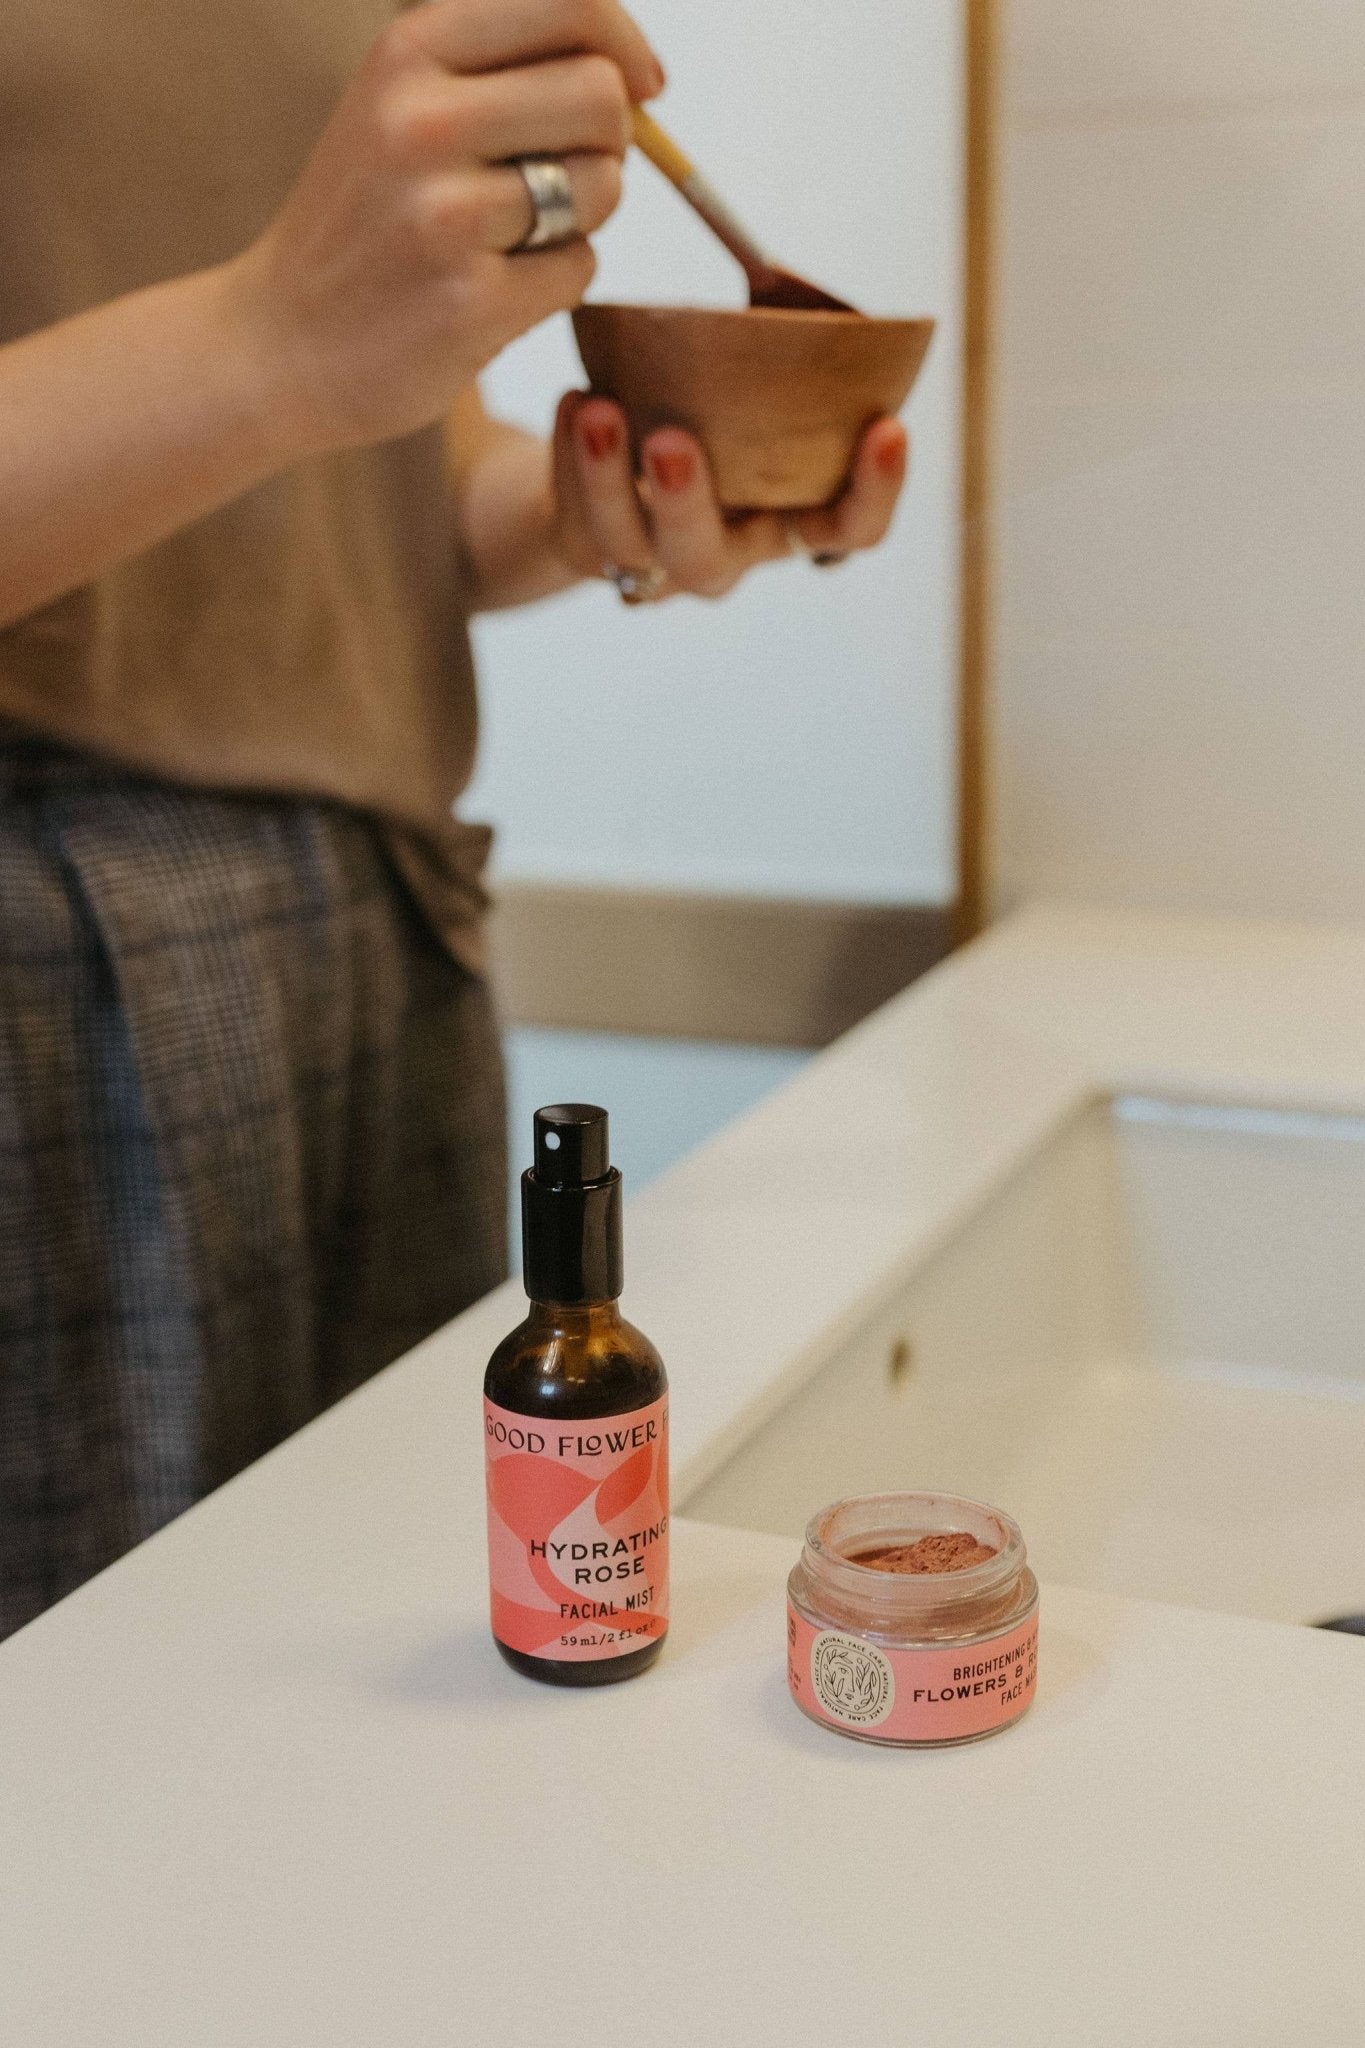 Flowers & Rose Clay Botanical Face Mask - 1 oz - Displayed in use, on a bathroom counter top, next to a hydrating rose facial mist - Echo Market